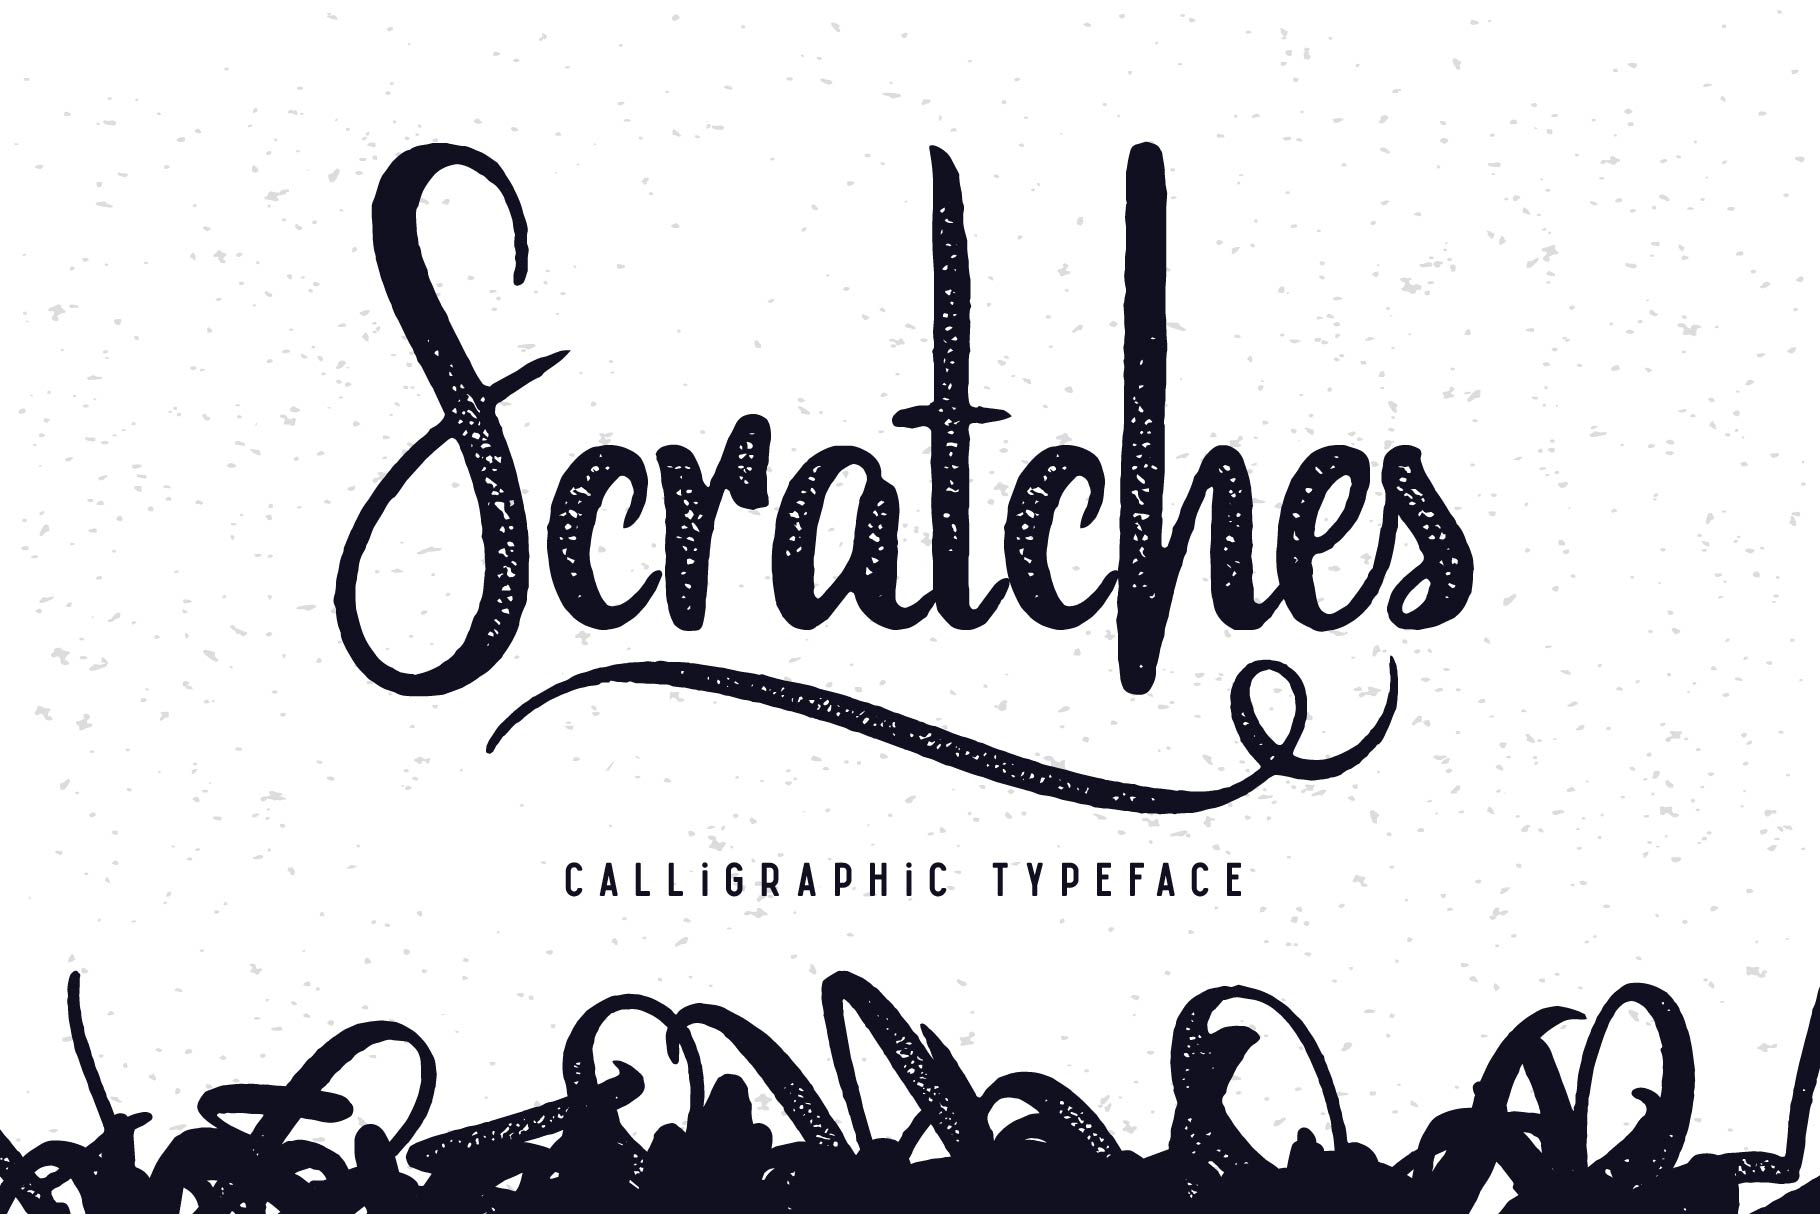 Awesome Scratches Calligraphic Font collage image for Facebook.